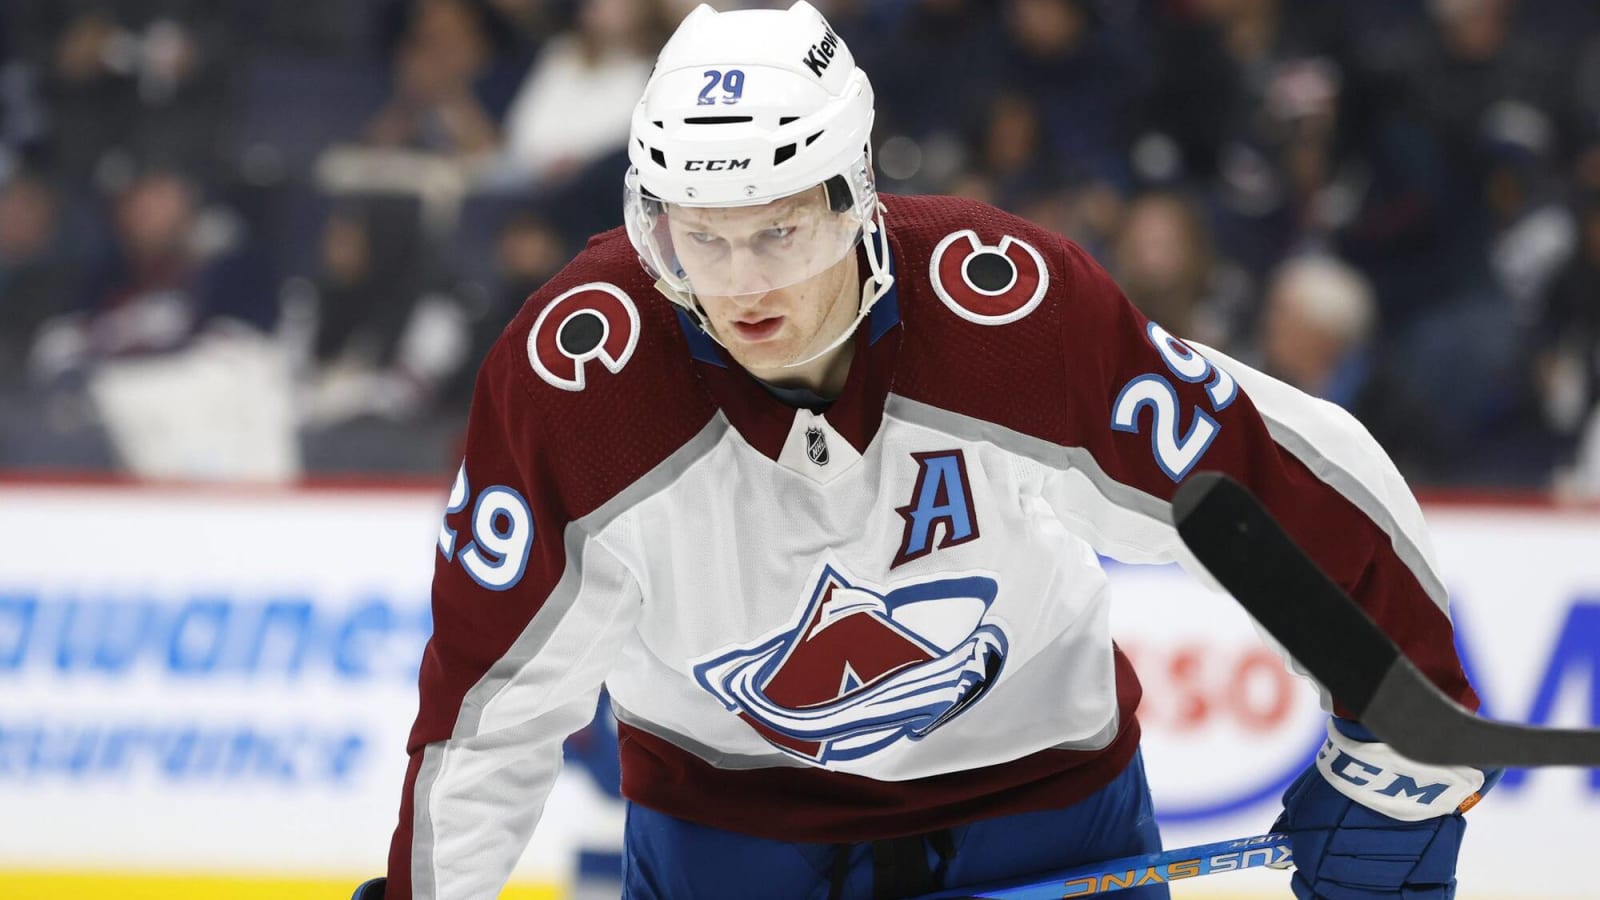 Is there anything McDavid, Kucherov can do to catch Nathan Mackinnon for the Hart Trophy?